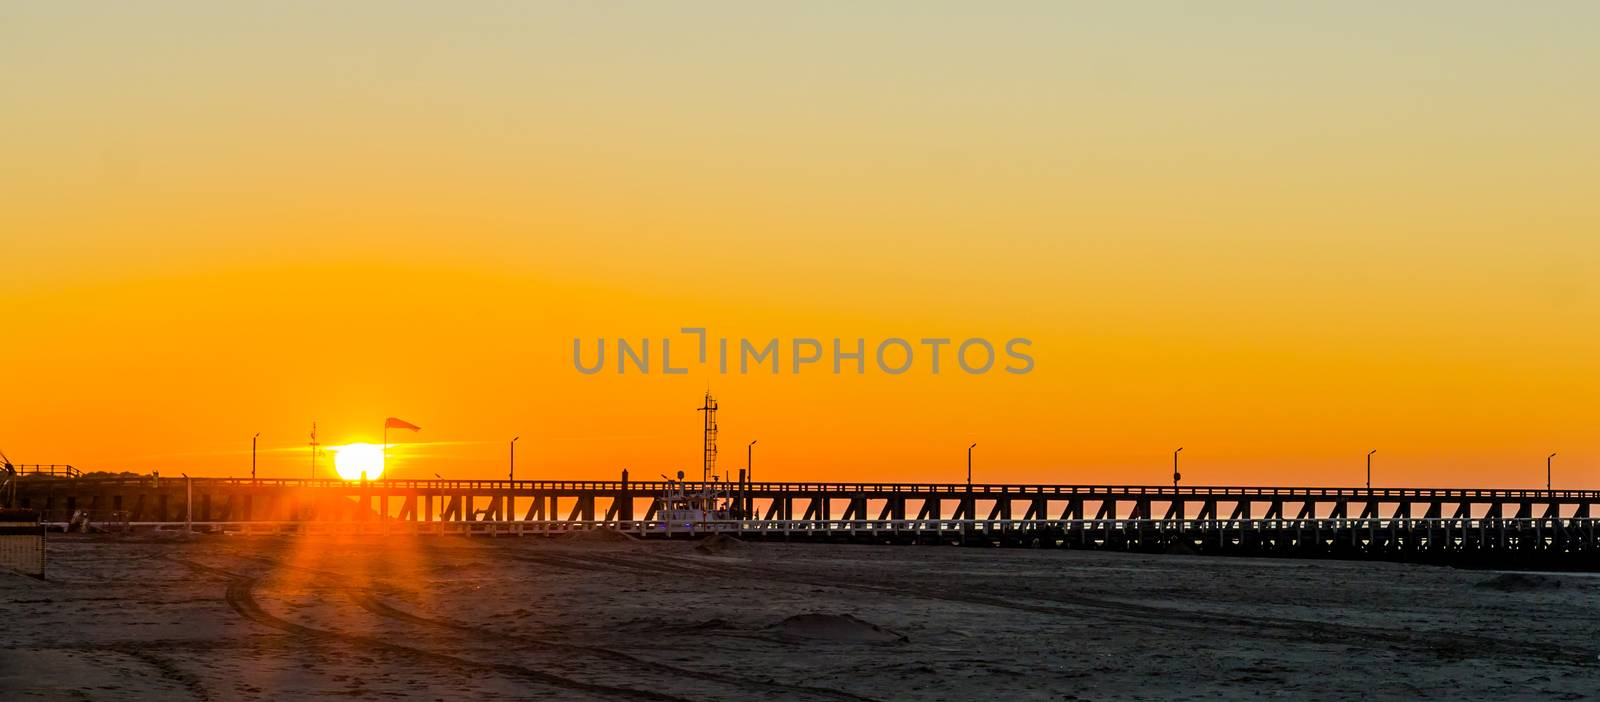 long pier at sunset on the beach of Blankenberge, Belgium, sunset with a colorful sky by charlottebleijenberg